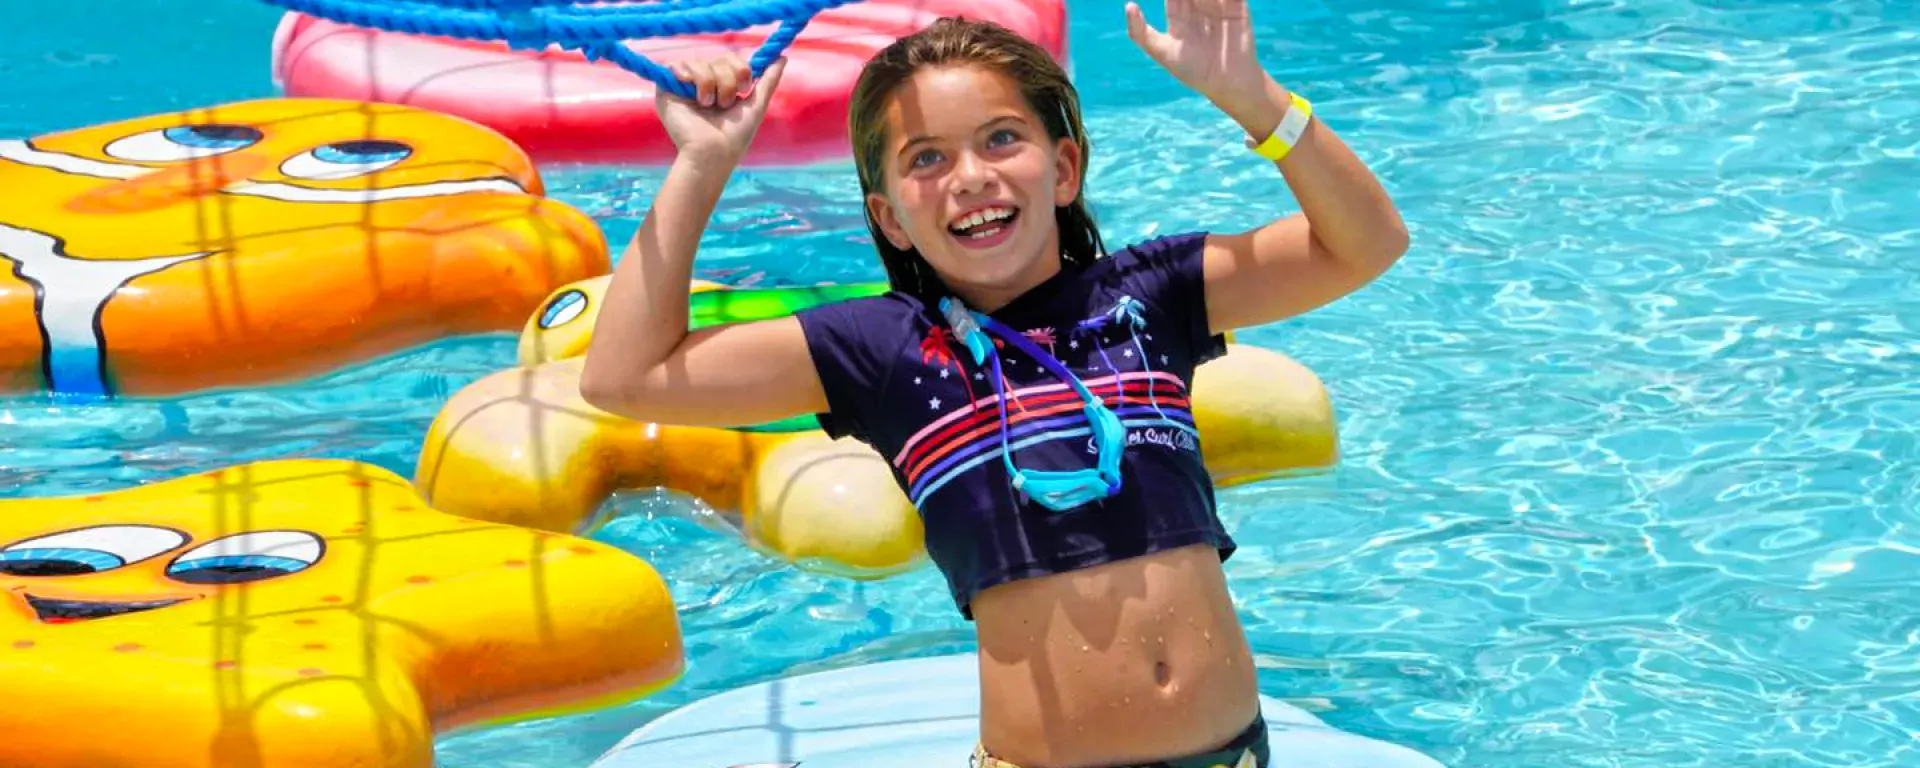 Image of a young girl playing on the wiggly waters attraction at Sailfish Splash Waterpark in Stuart, FL.